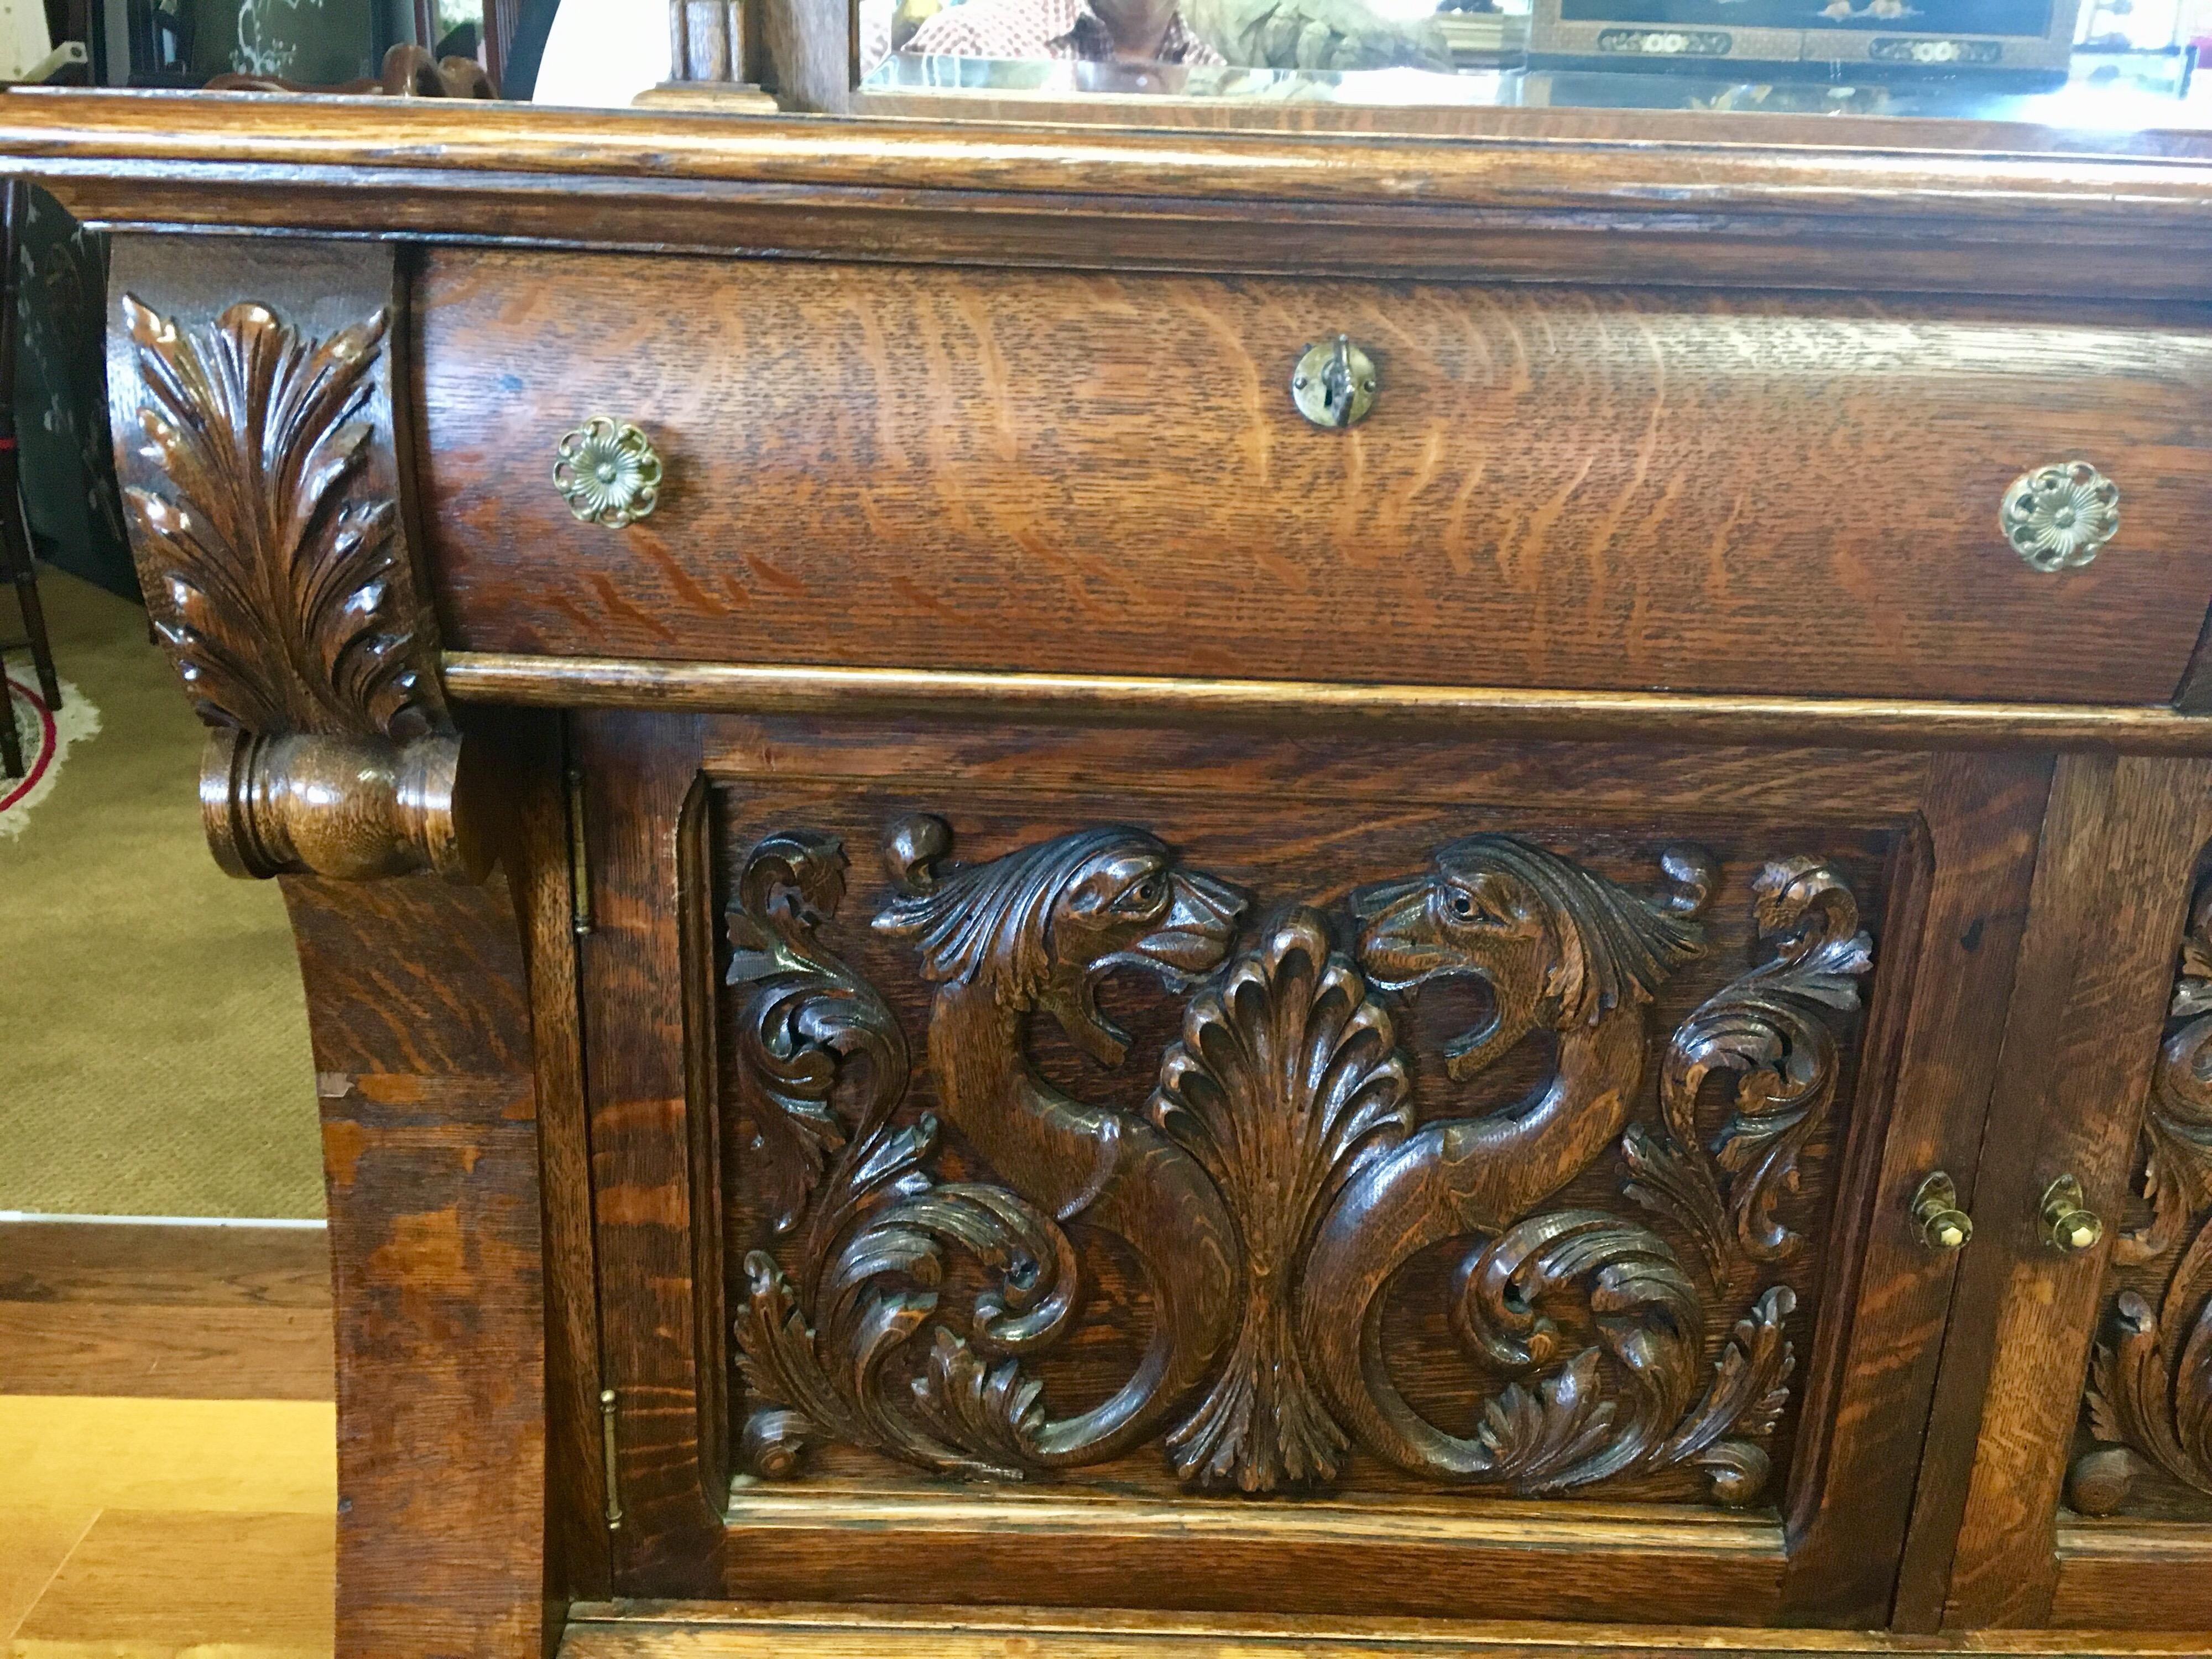 Oak Antique George III English Carved Cabinet Credenza Sideboard Buffet